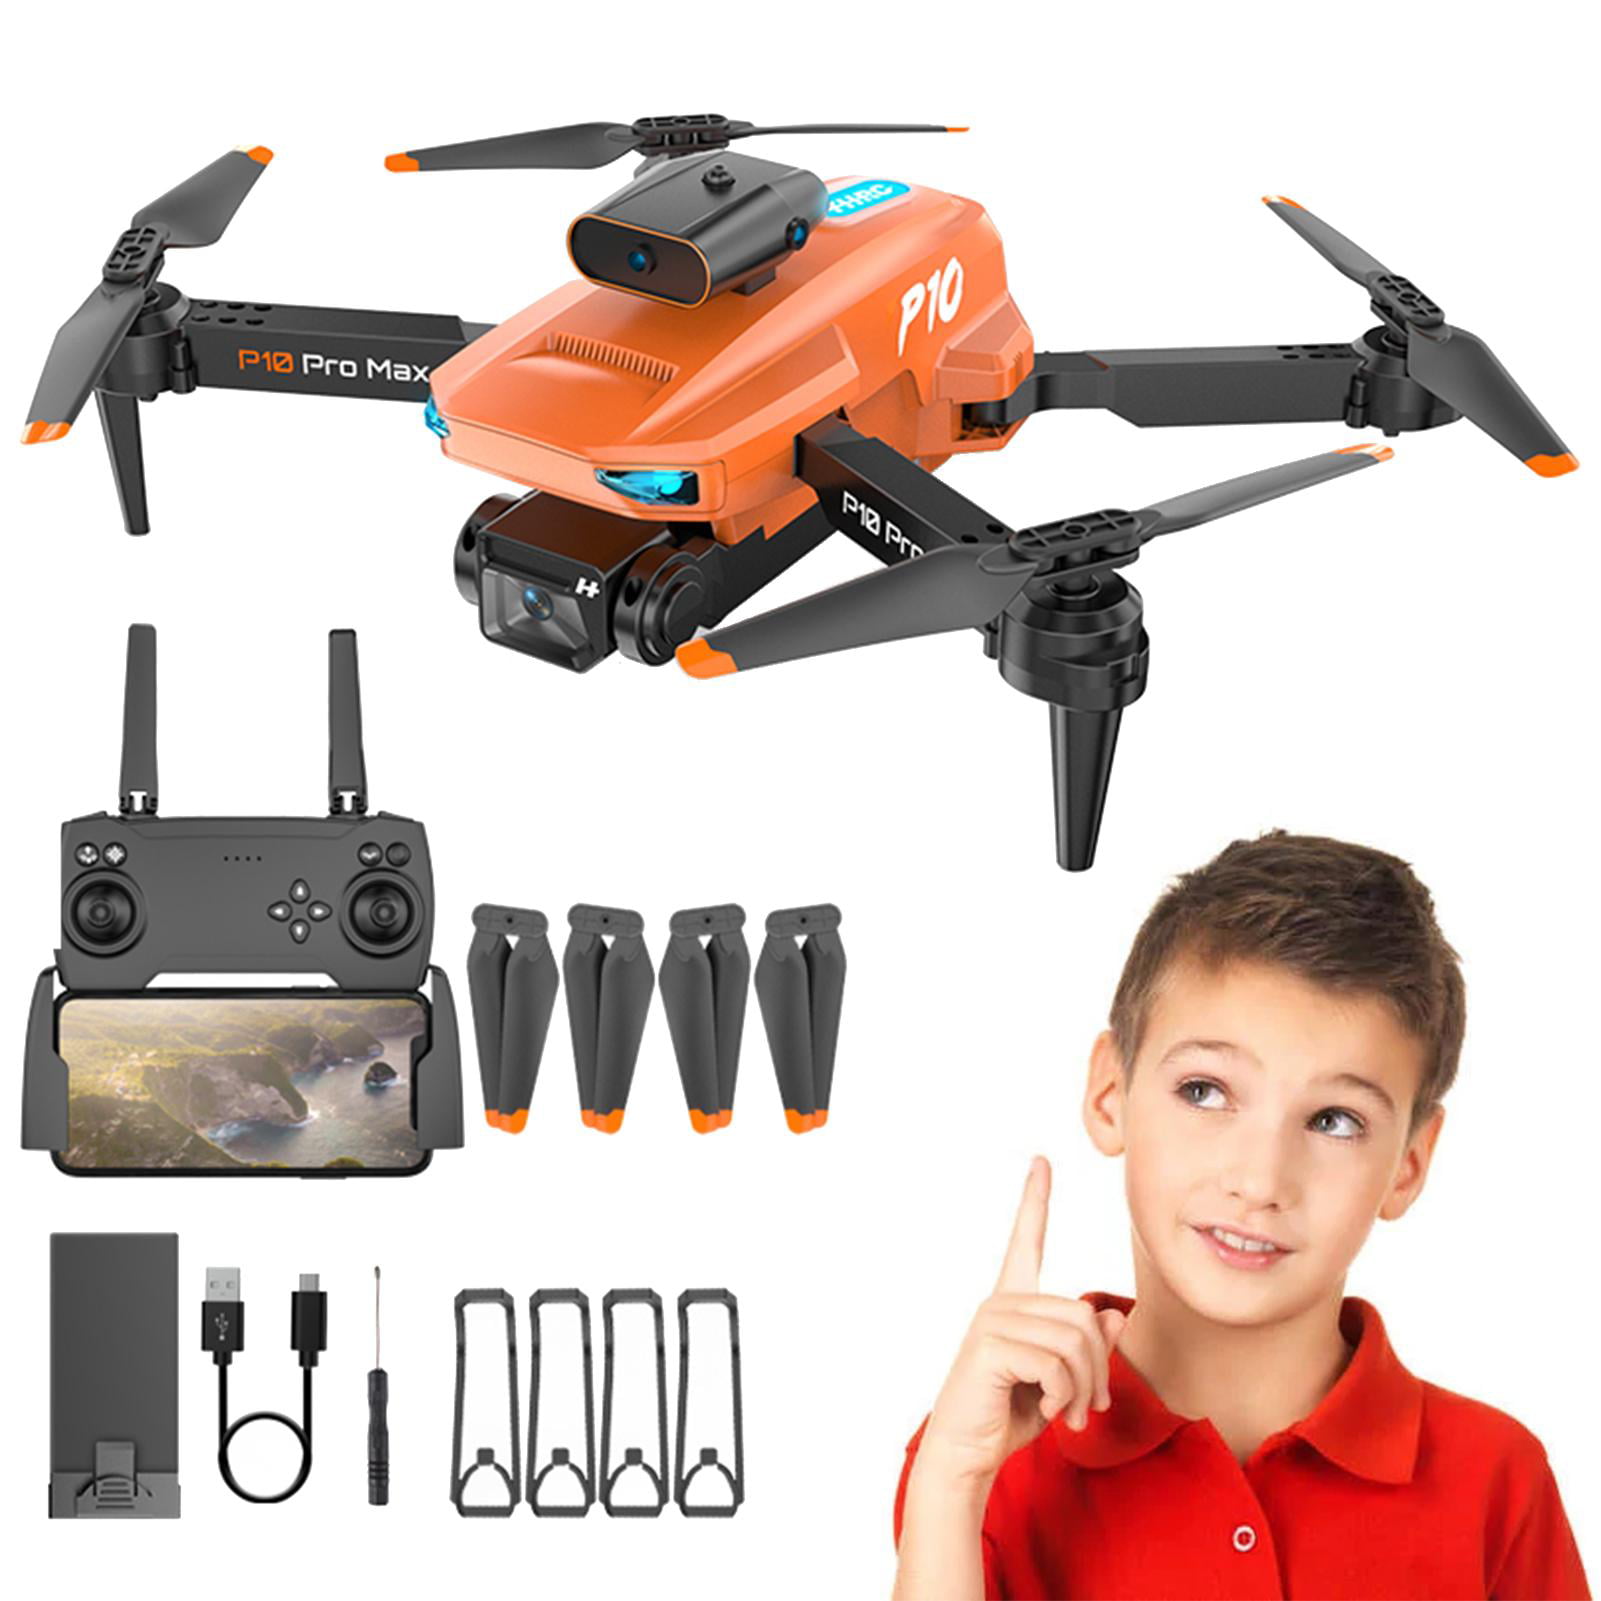 Dual Camera Drone Obstacle Avoidance Drones for Adults High Definition WIFI Remote Controlling Flying Toy for Holding, Image Transmission, and Taking Photos - Walmart.com